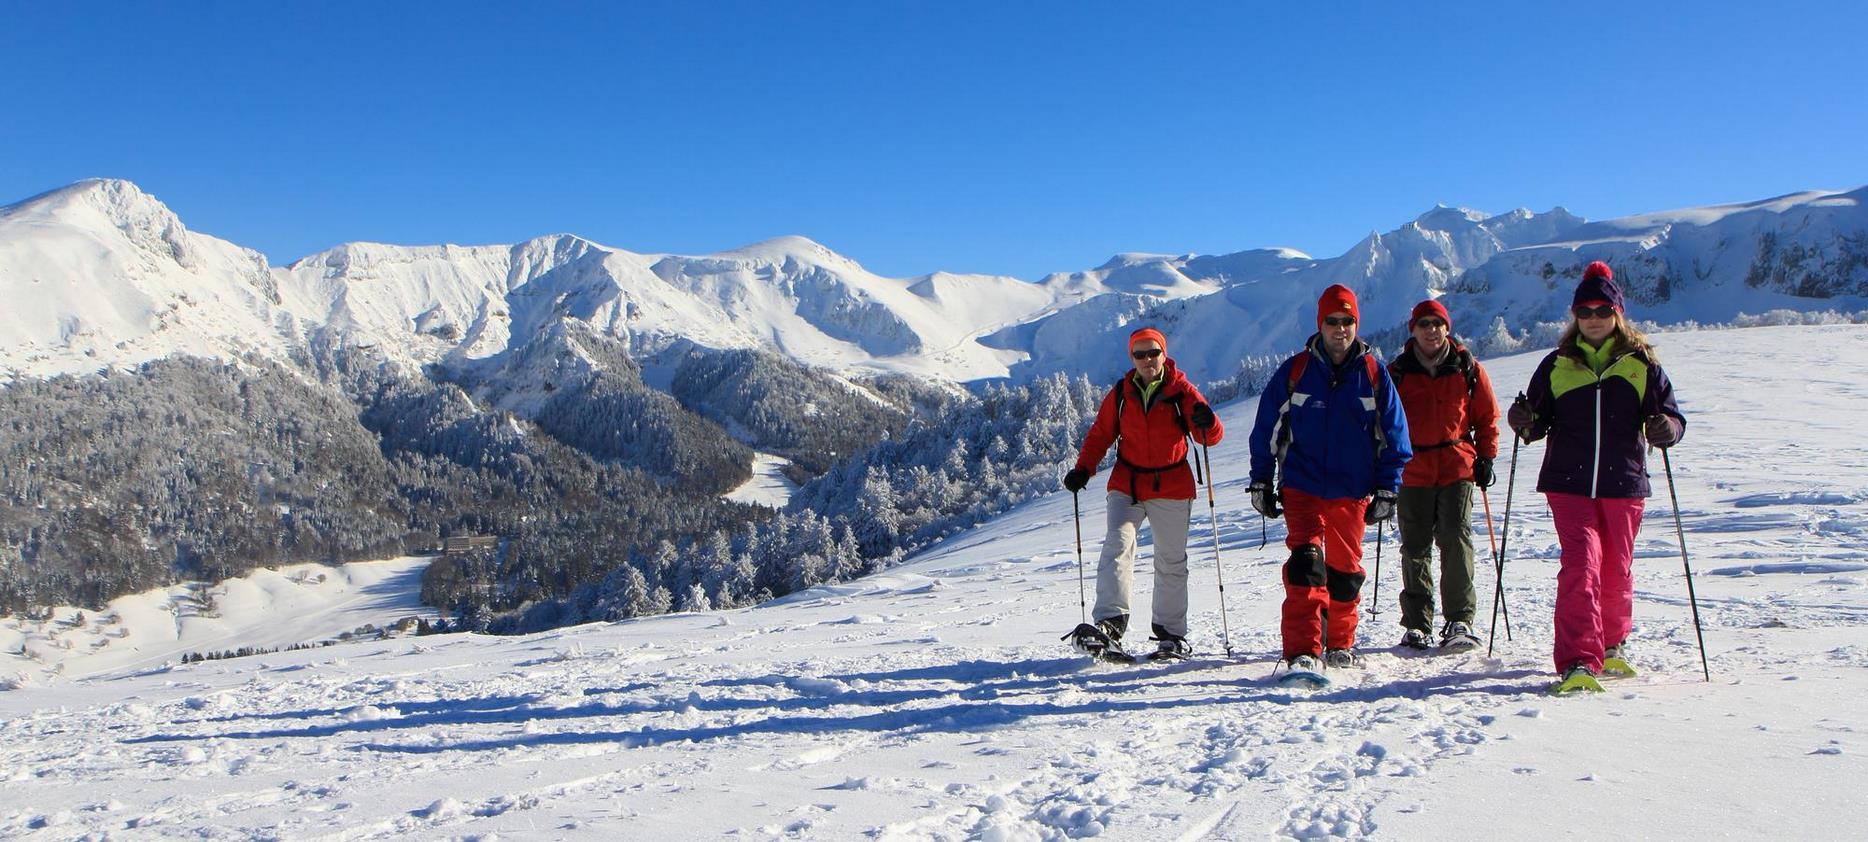 Massif du Sancy - snowshoeing for a group of hikers